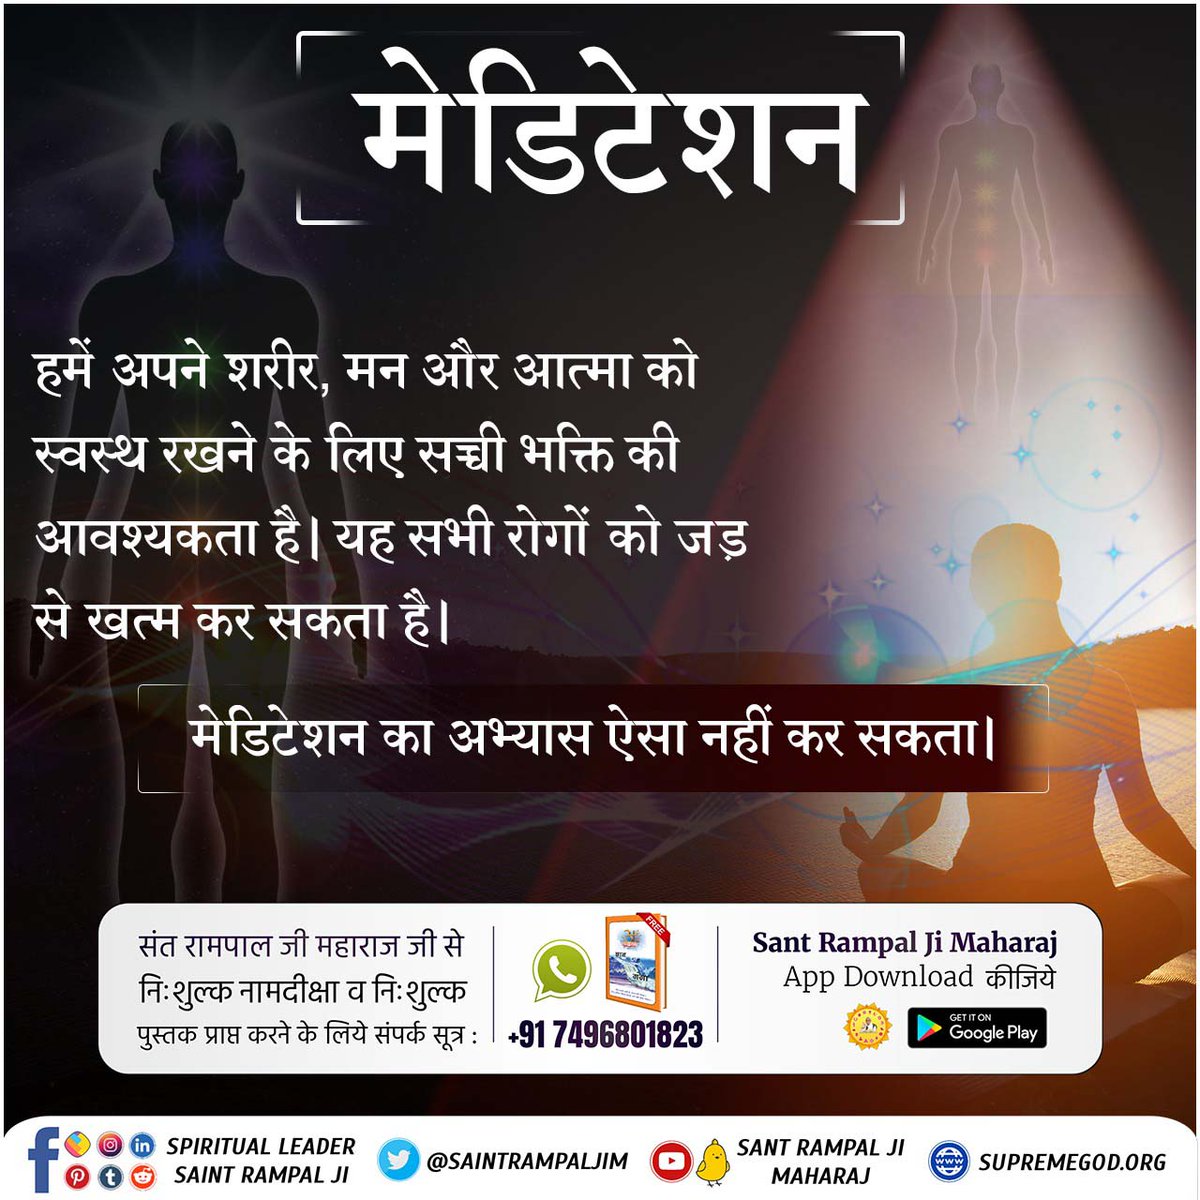 Meditation or Hath Yoga has limited mind-body benefits, and it's not the path to salvation?  According to ancient scriptures, traditional meditation does not lead to ultimate liberation.
👉Sant Rampal Ji Maharaj.🌼
#What_Is_Meditation
#SantRampalJiMaharaj